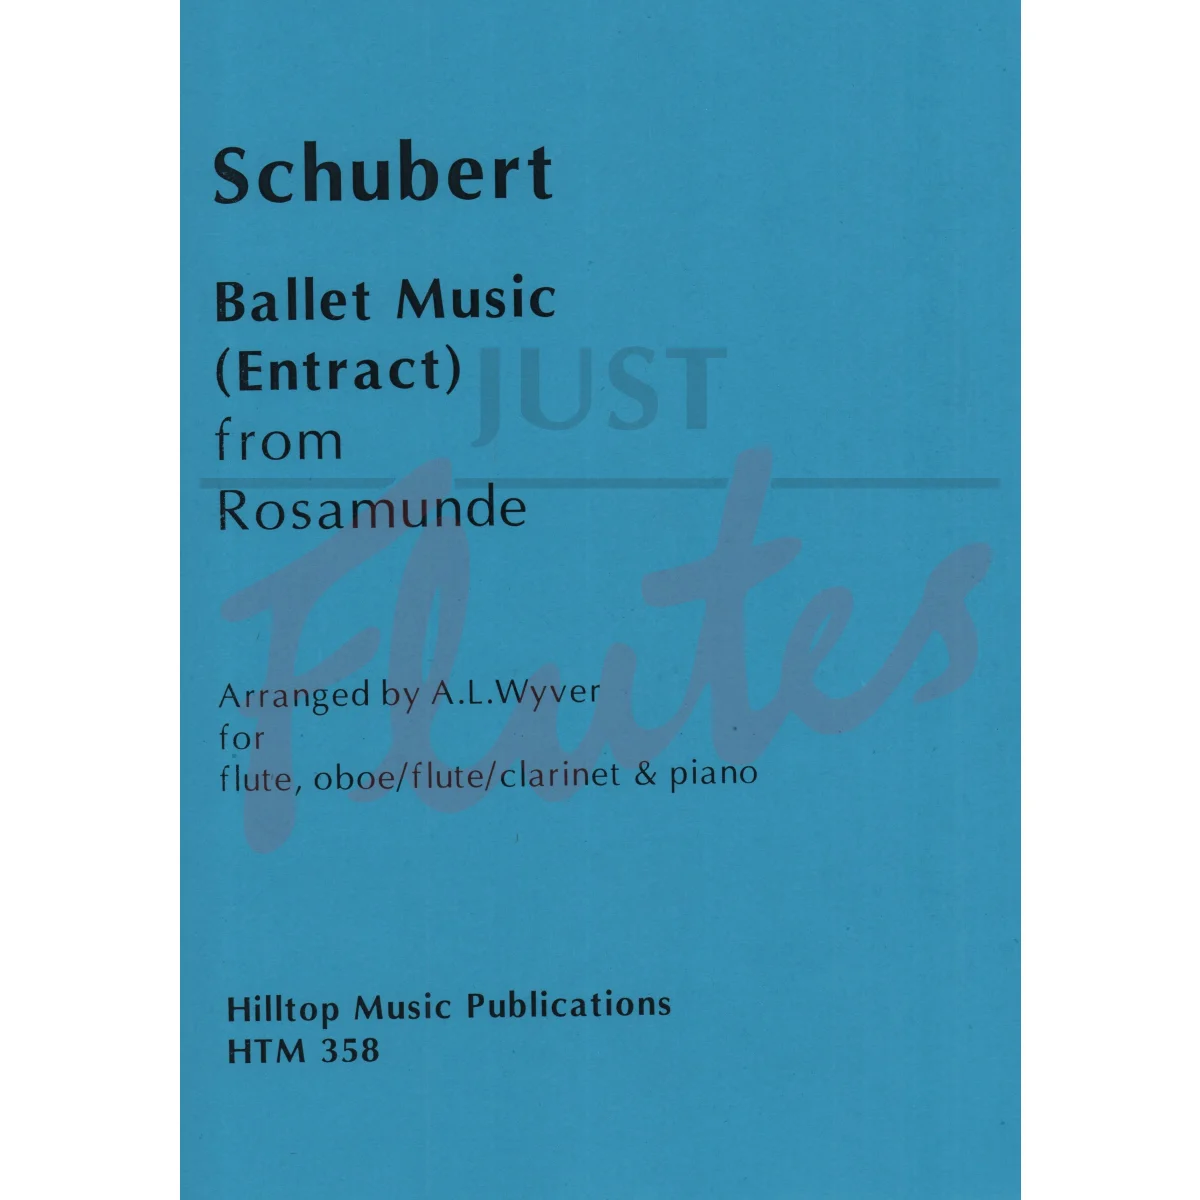 Ballet Music (Entract) from Rosamunde for Flute, Oboe/Flute/Clarinet and Piano